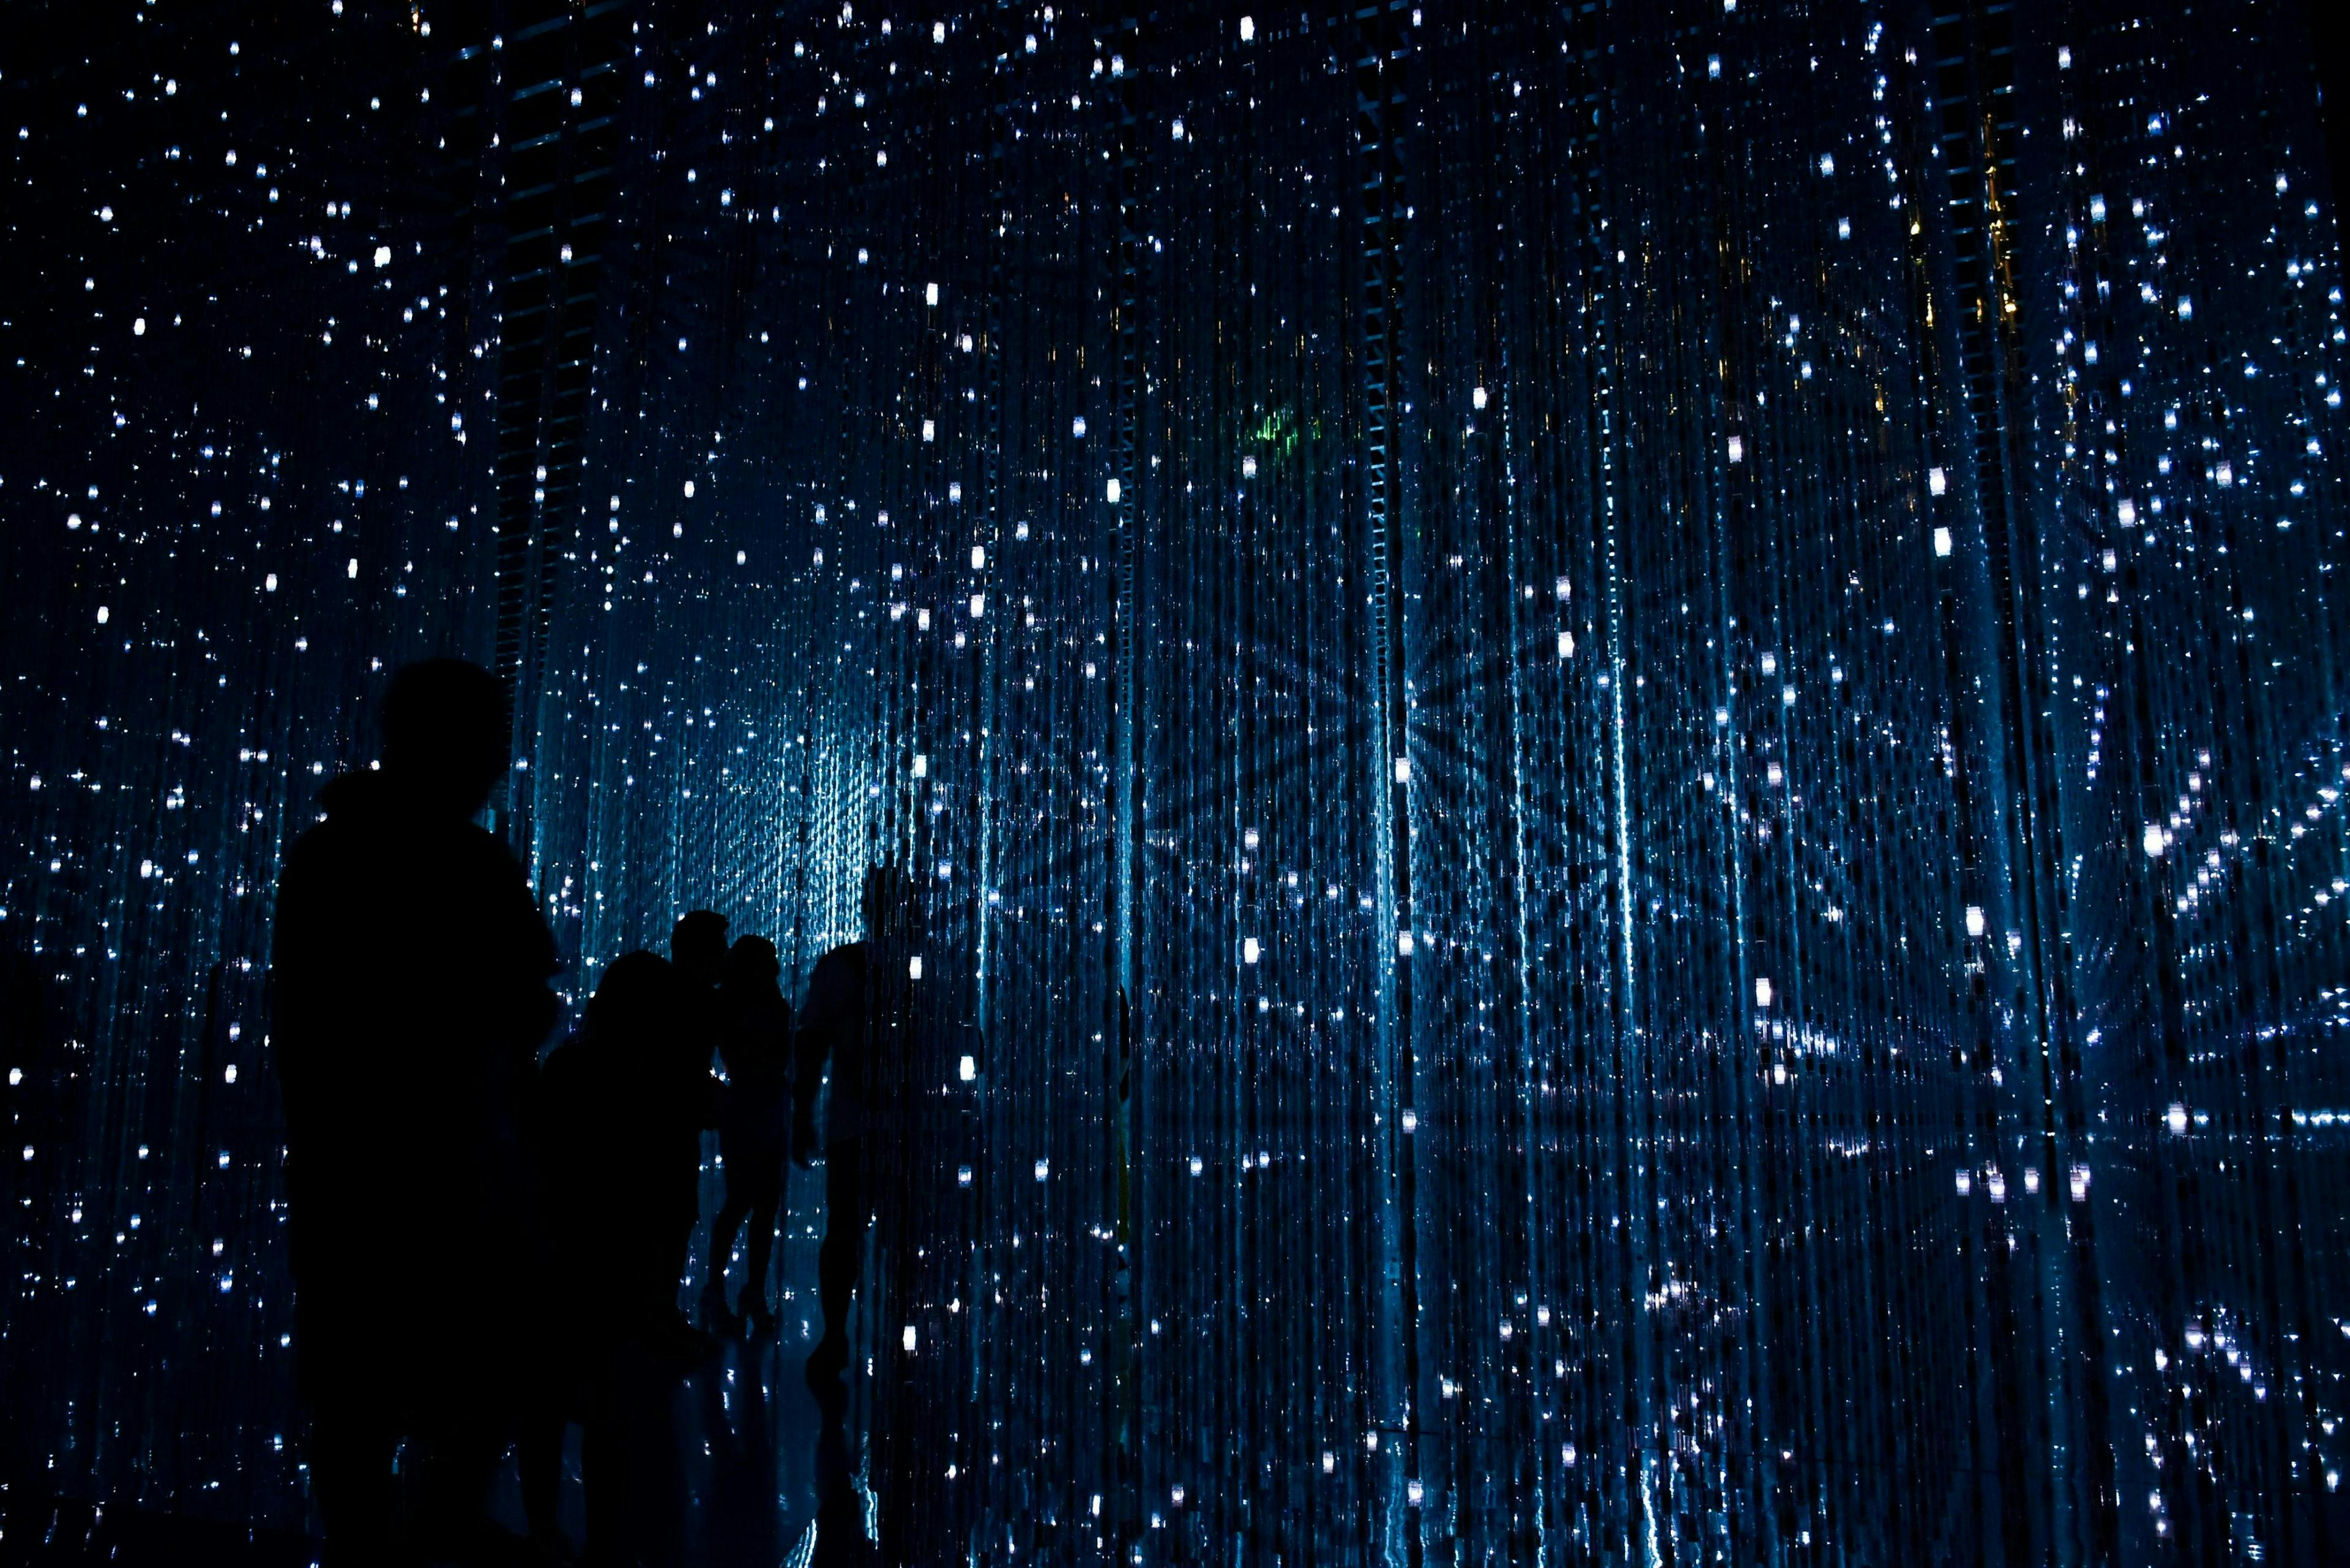 Silhouetted figures stand, observing light strands suspended in a dark, immersive room resembling a starry sky, creating an ethereal, almost cosmic atmosphere.